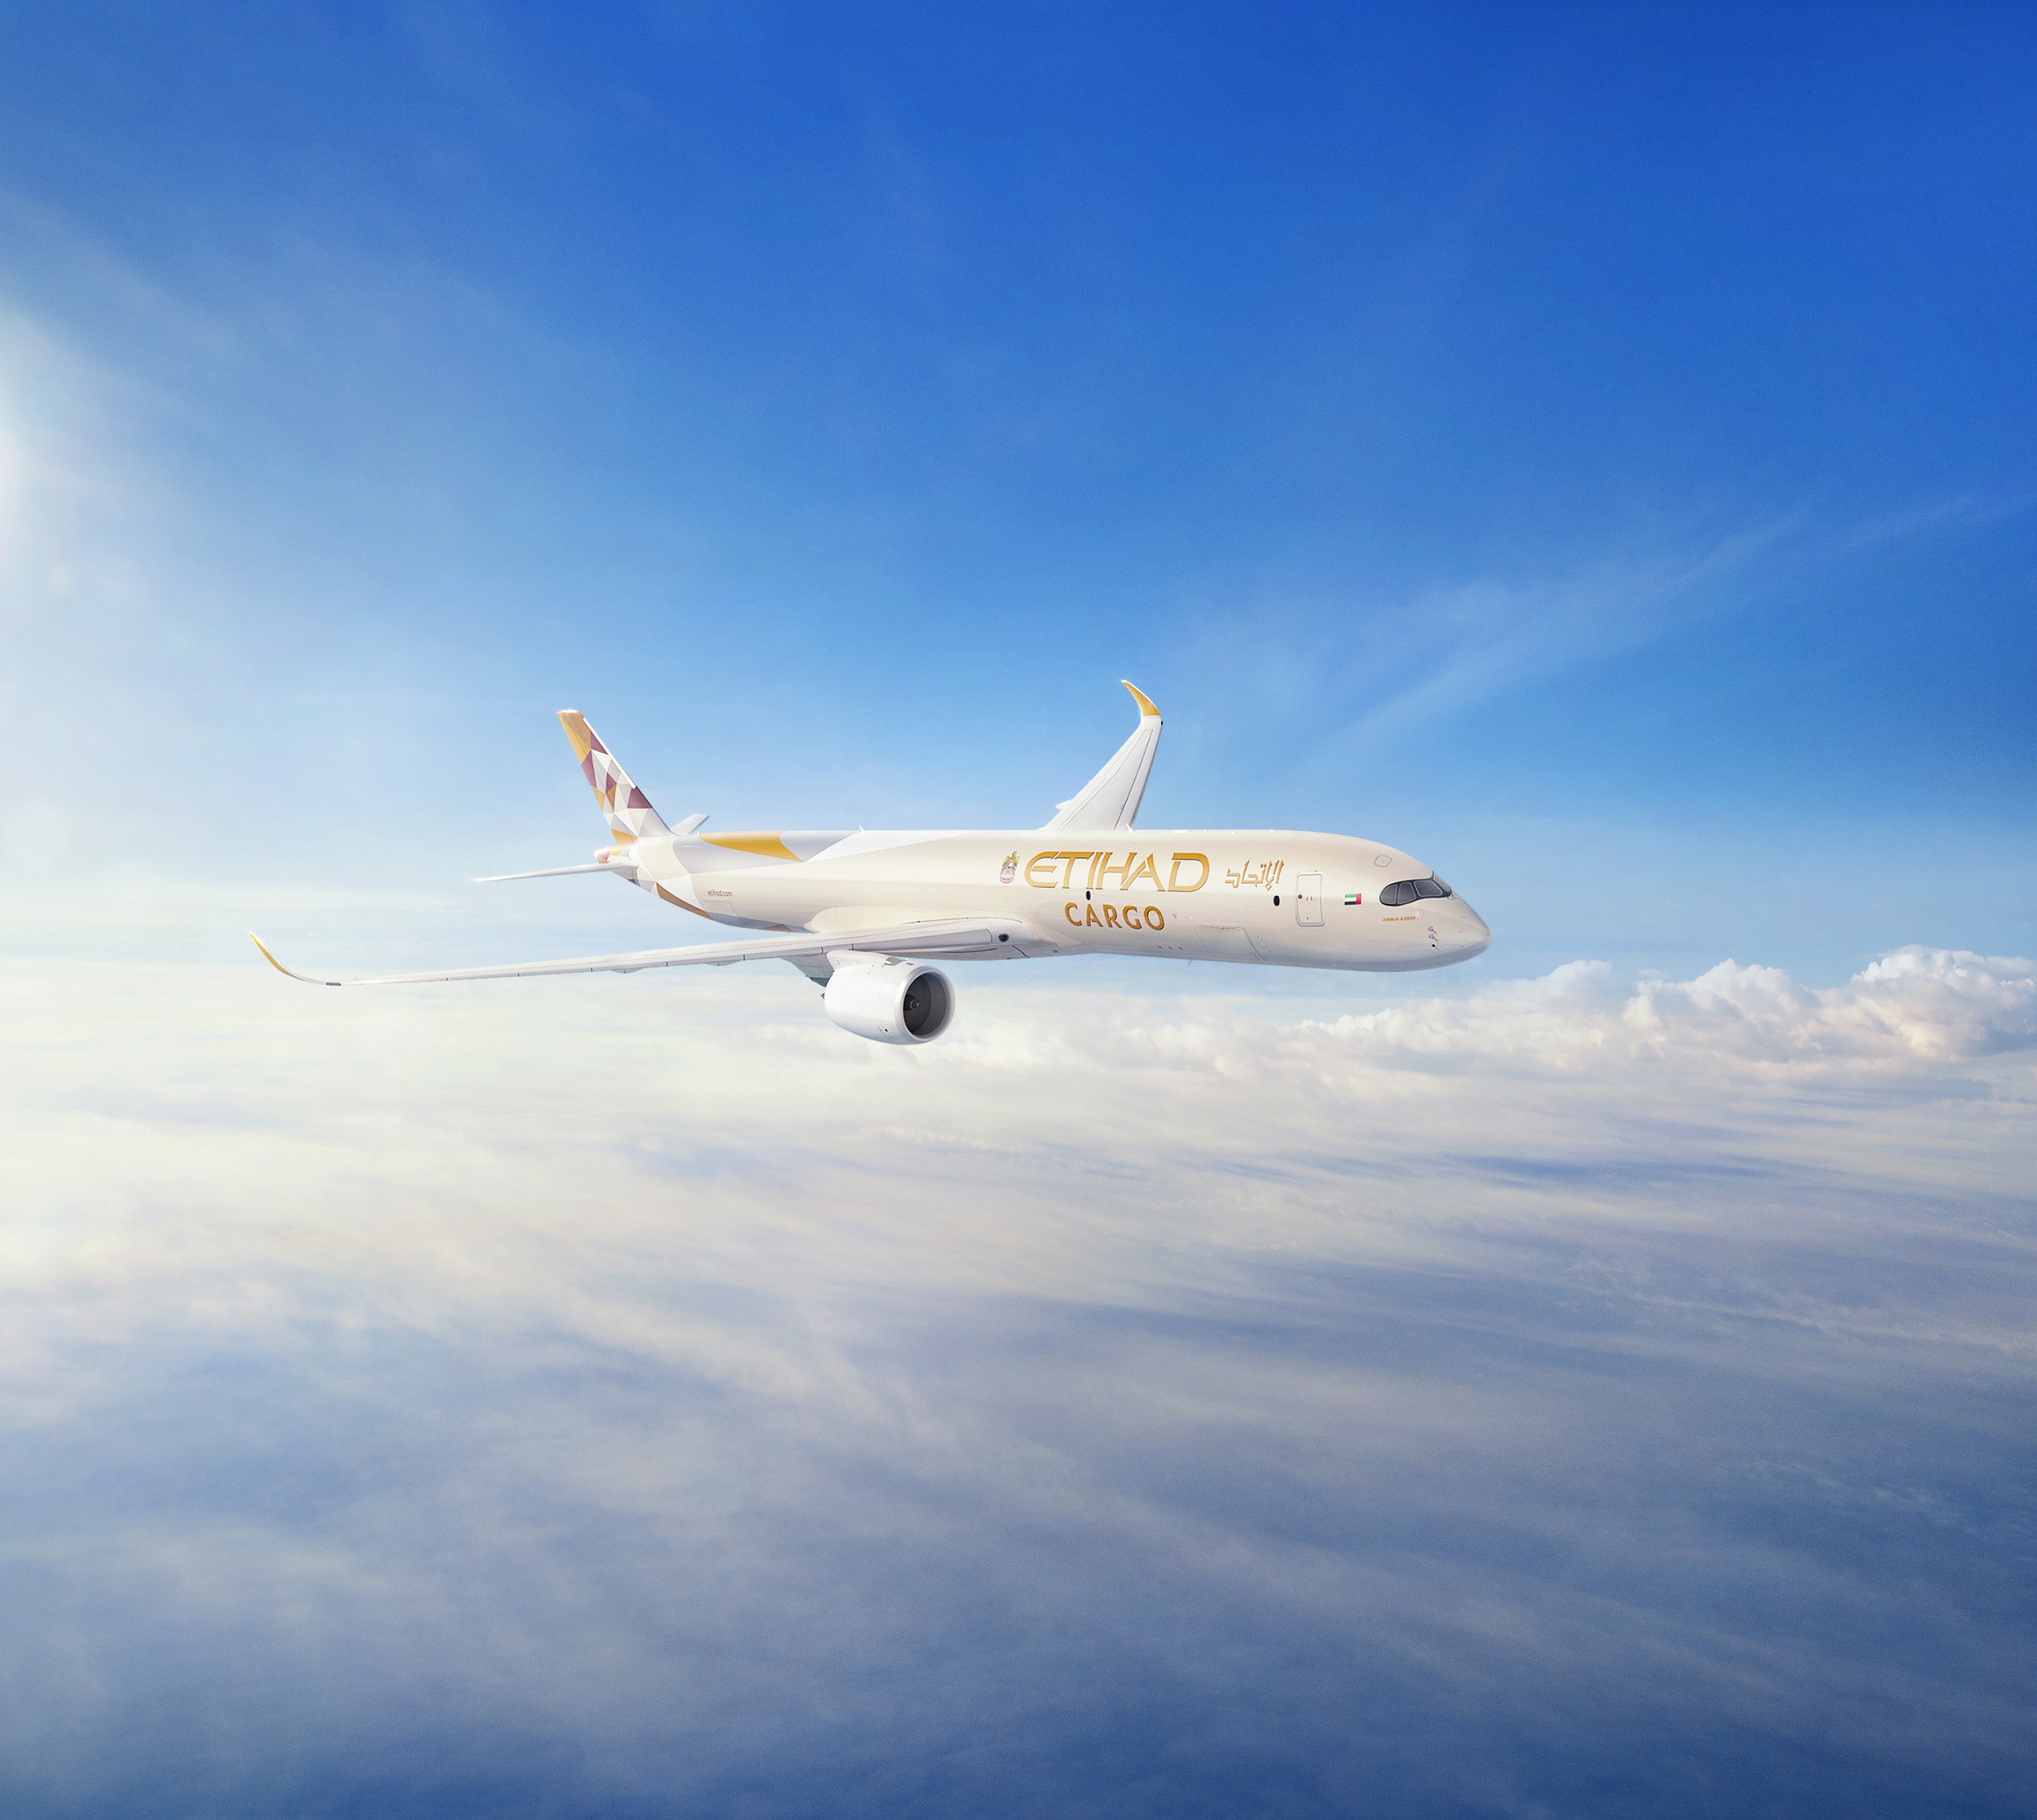 Etihad Airways Scales Up Its Cargo oOperations With Airbus’ New Generation A350F Freighter